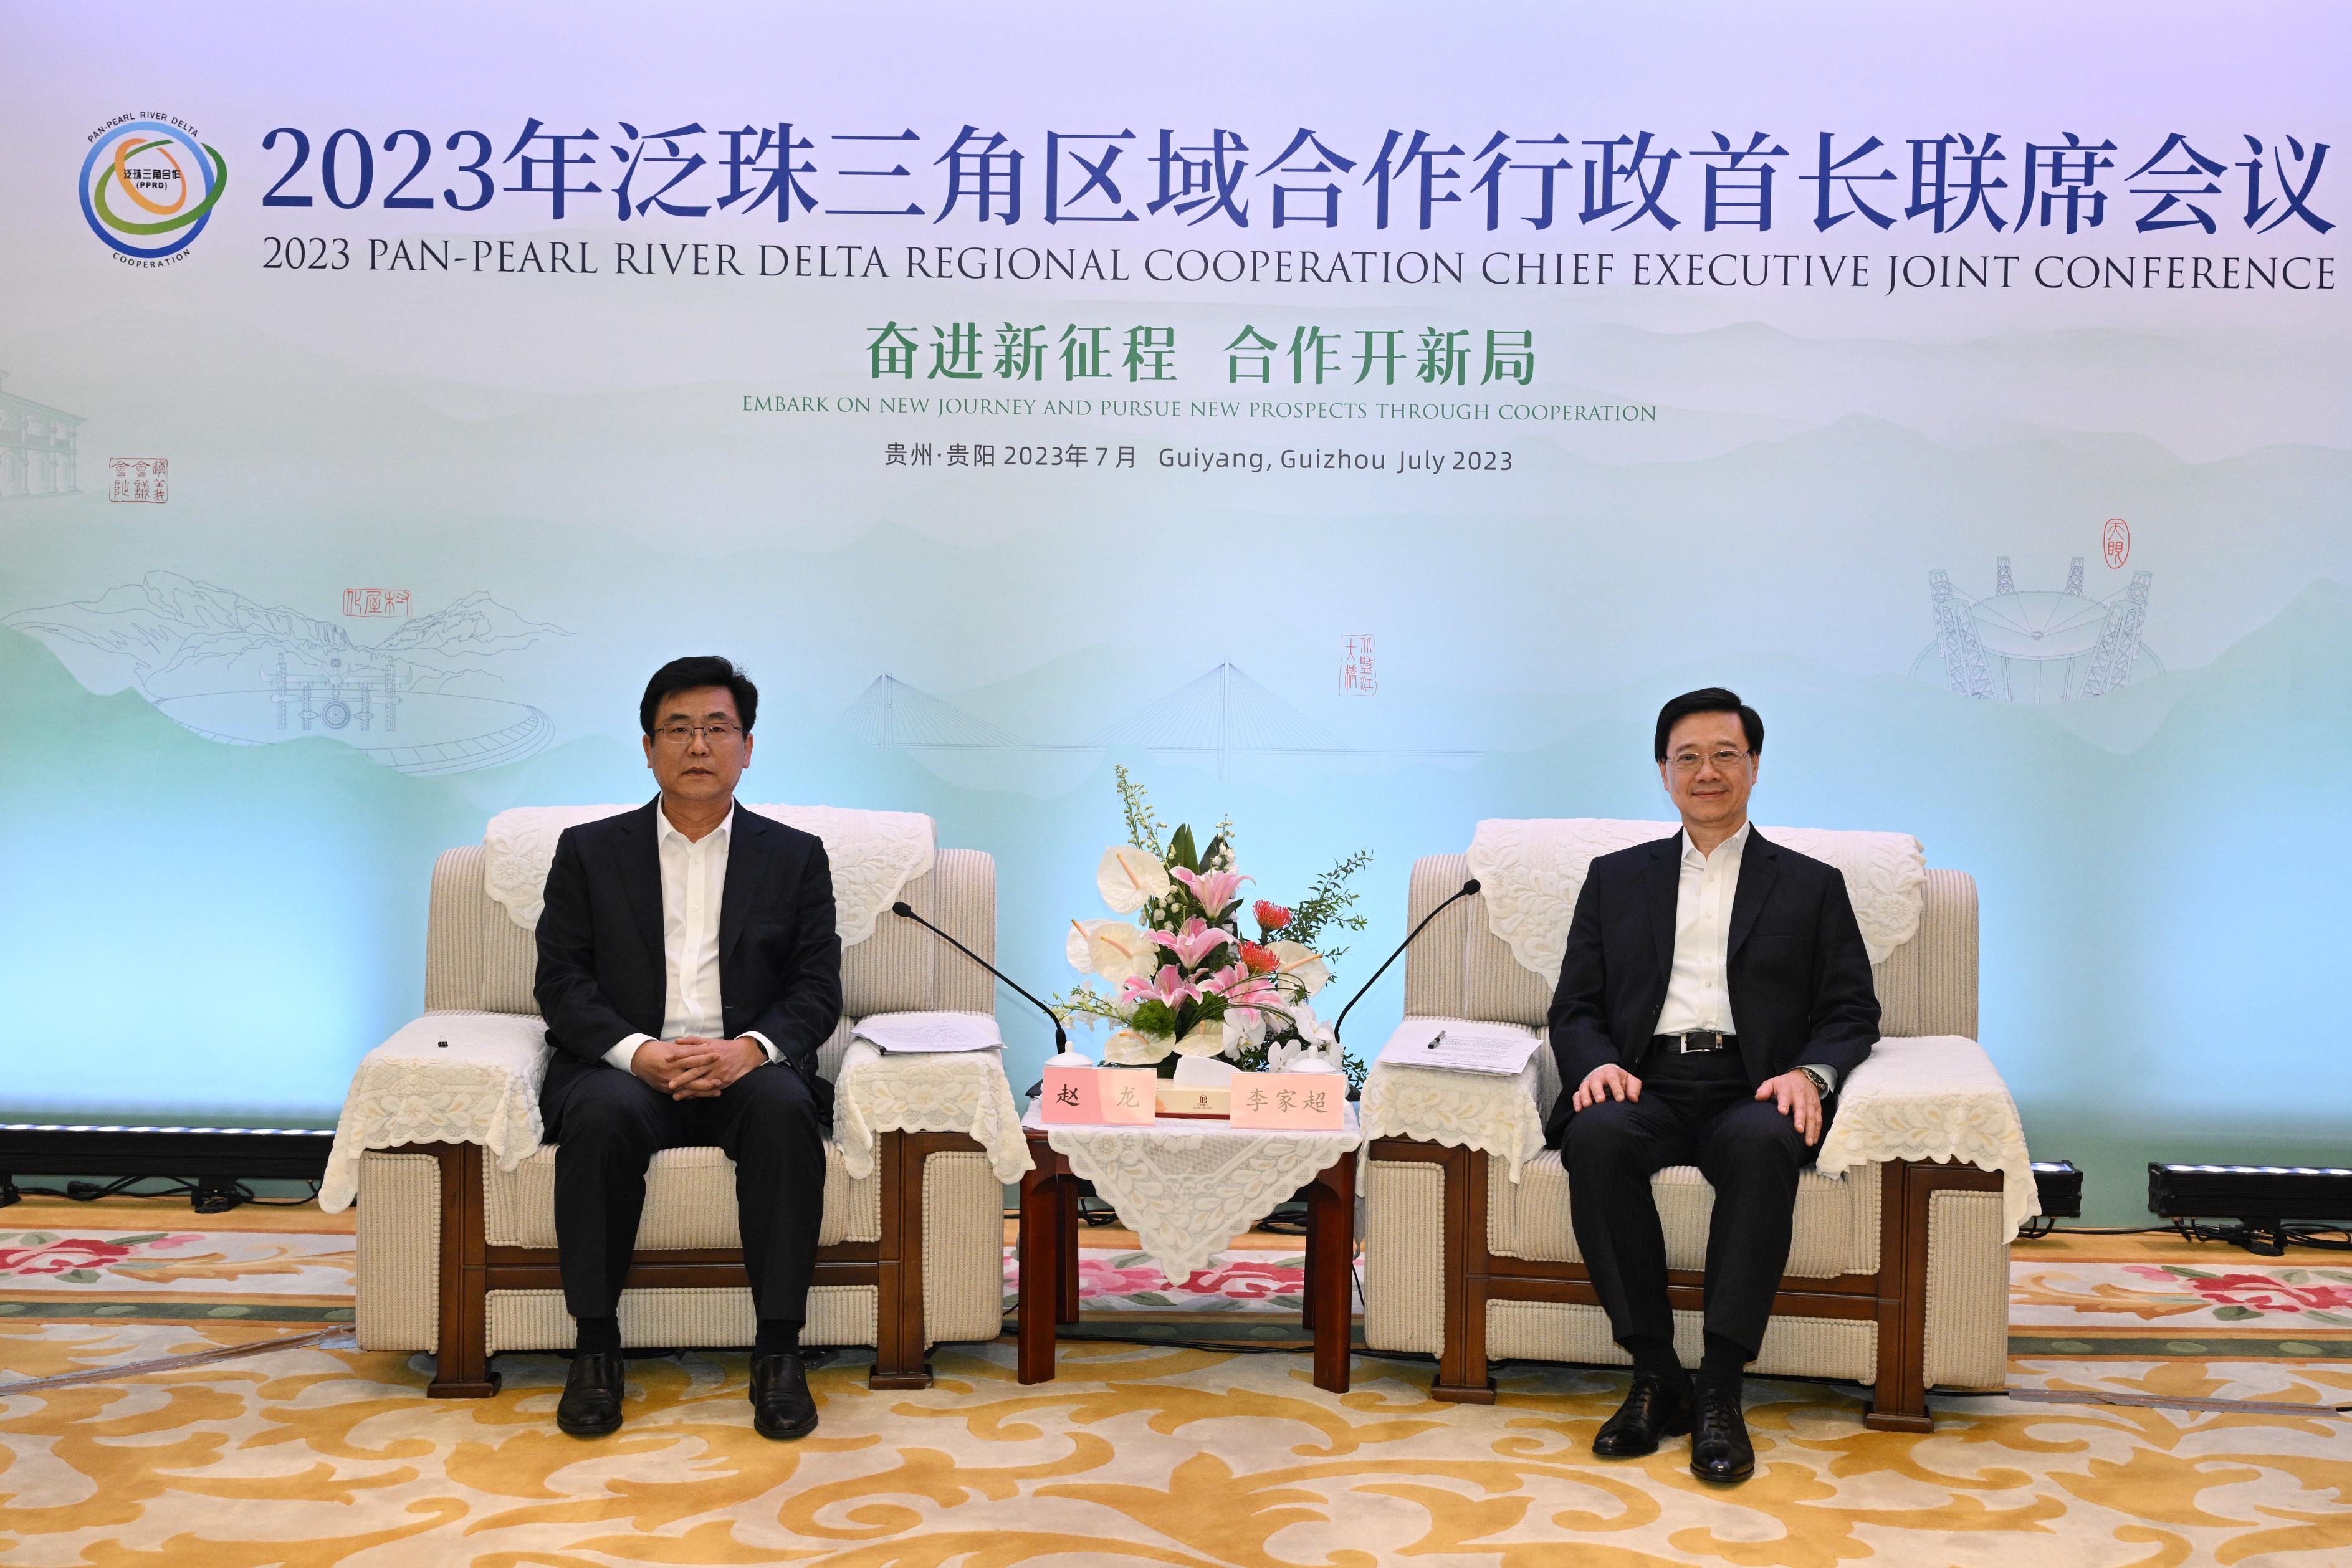 The Chief Executive, Mr John Lee, led a delegation to start his visit programme in Guiyang today (July 6). Photo shows Mr Lee (right) and the Governor of Fujian Province, Mr Zhao Long (left), at a bilateral meeting in Guiyang.